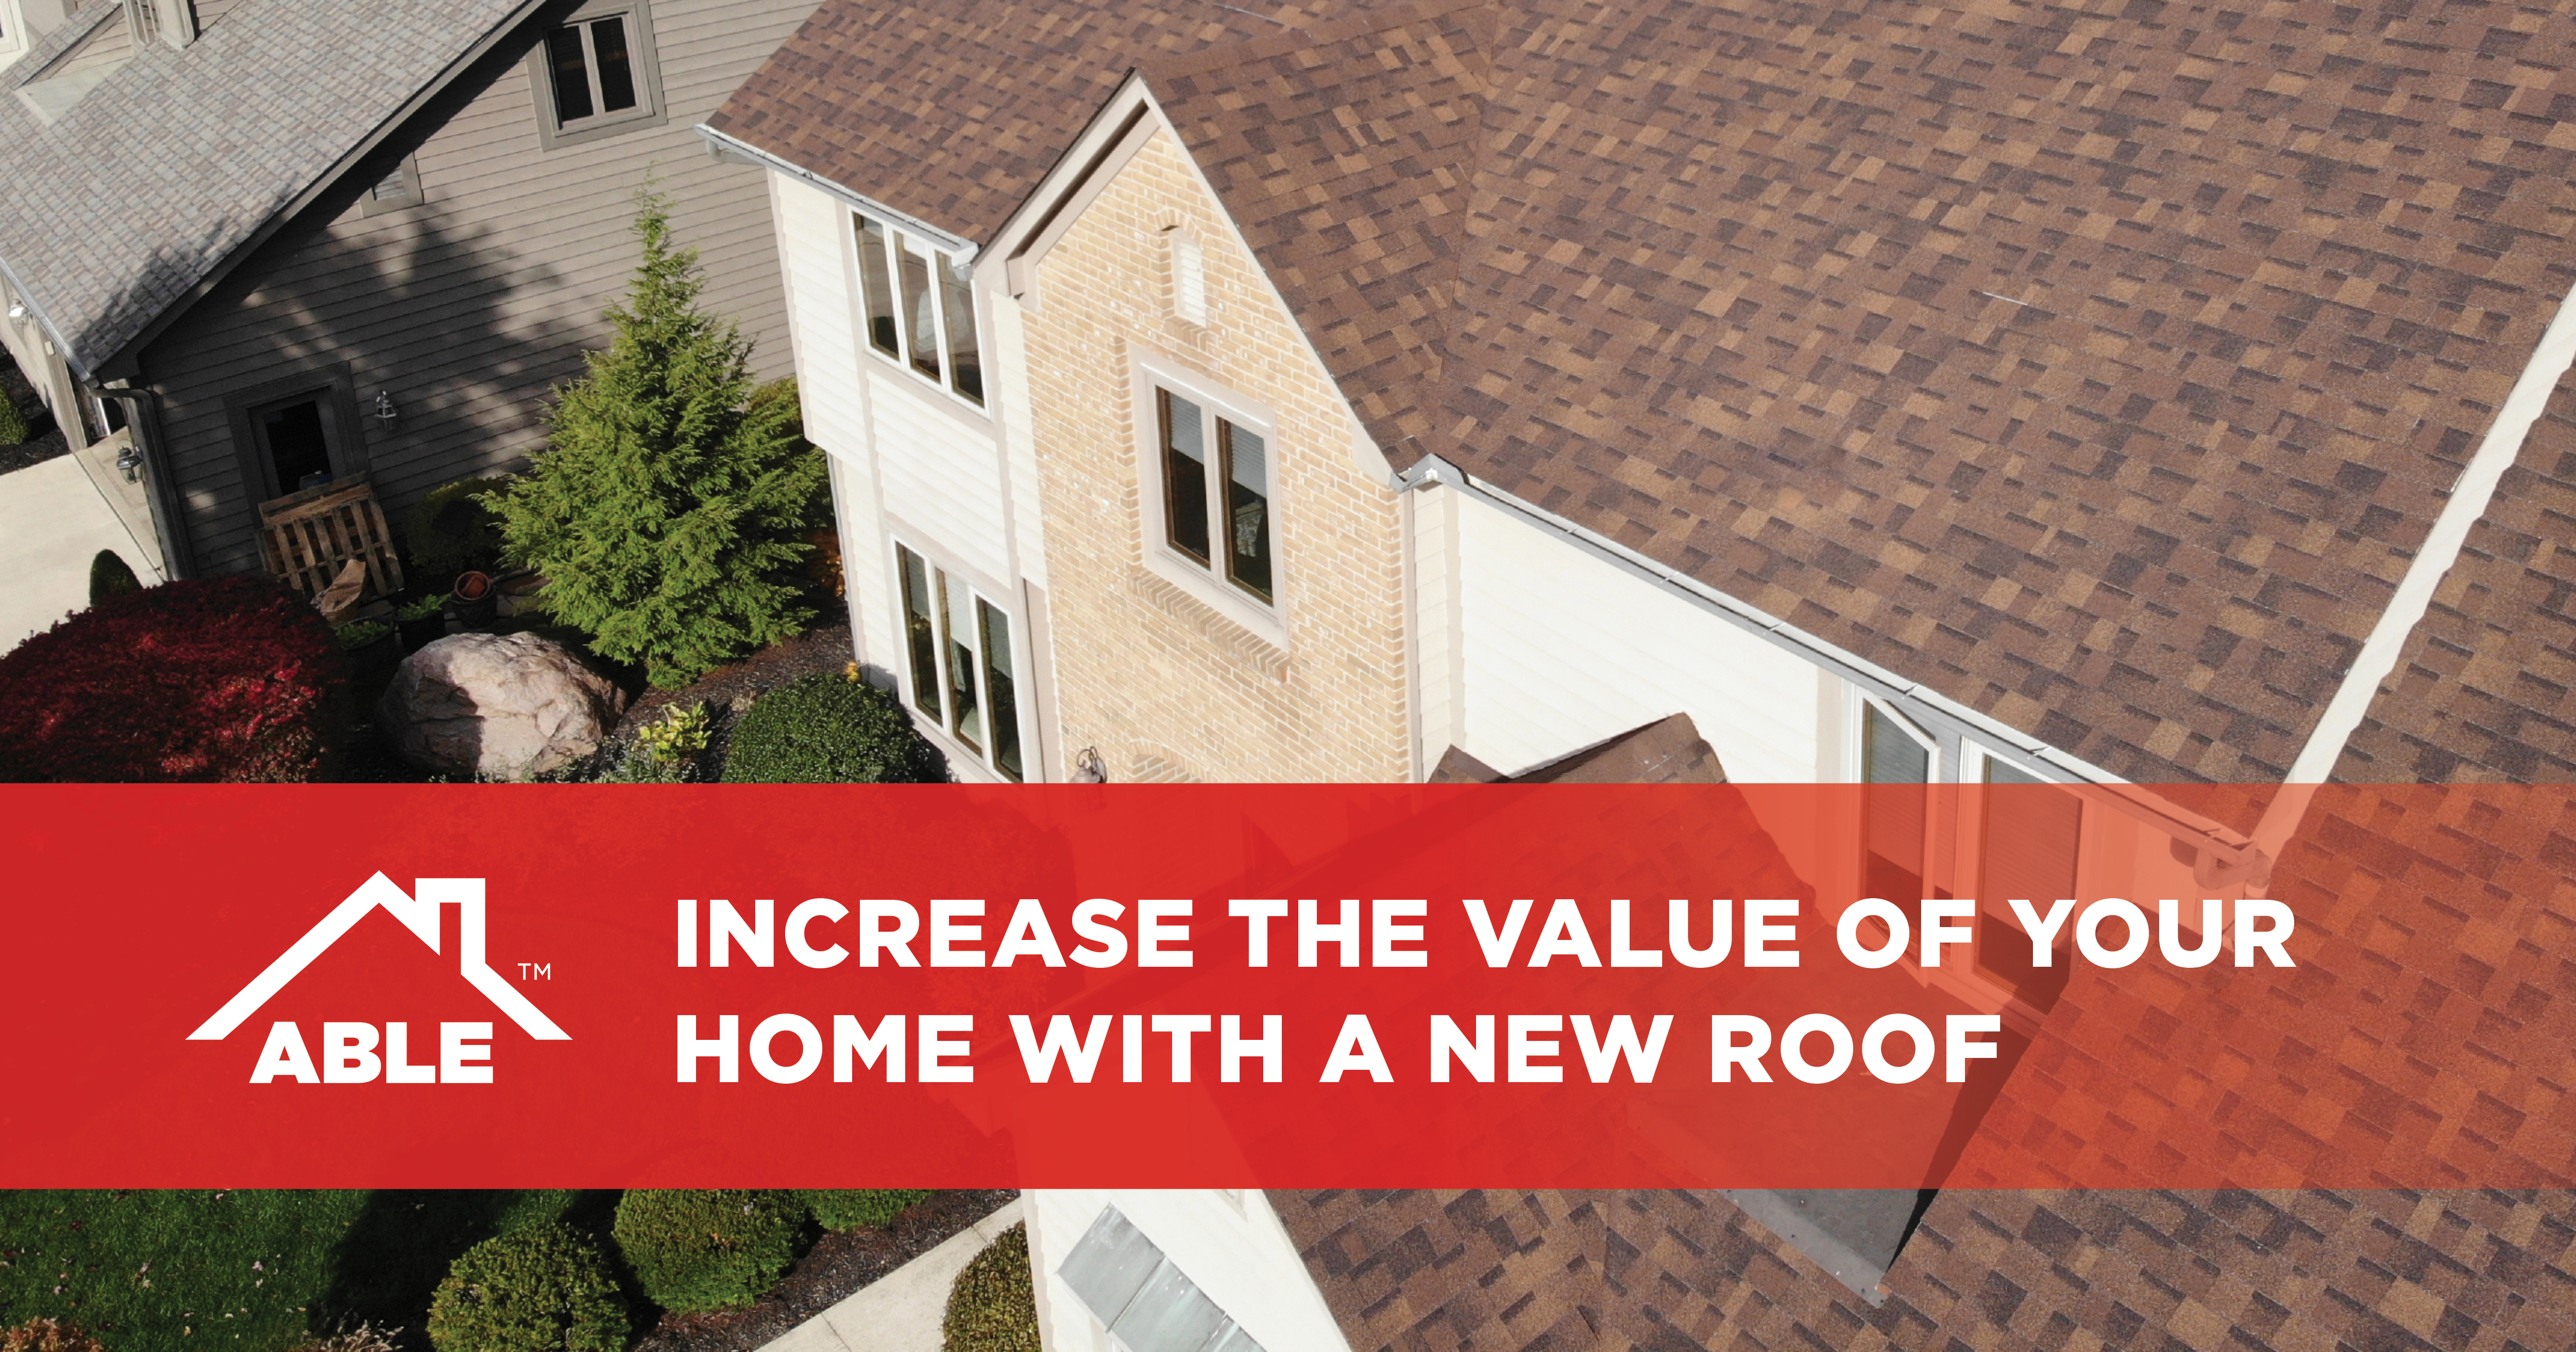 Increase the value of your home with a new roof